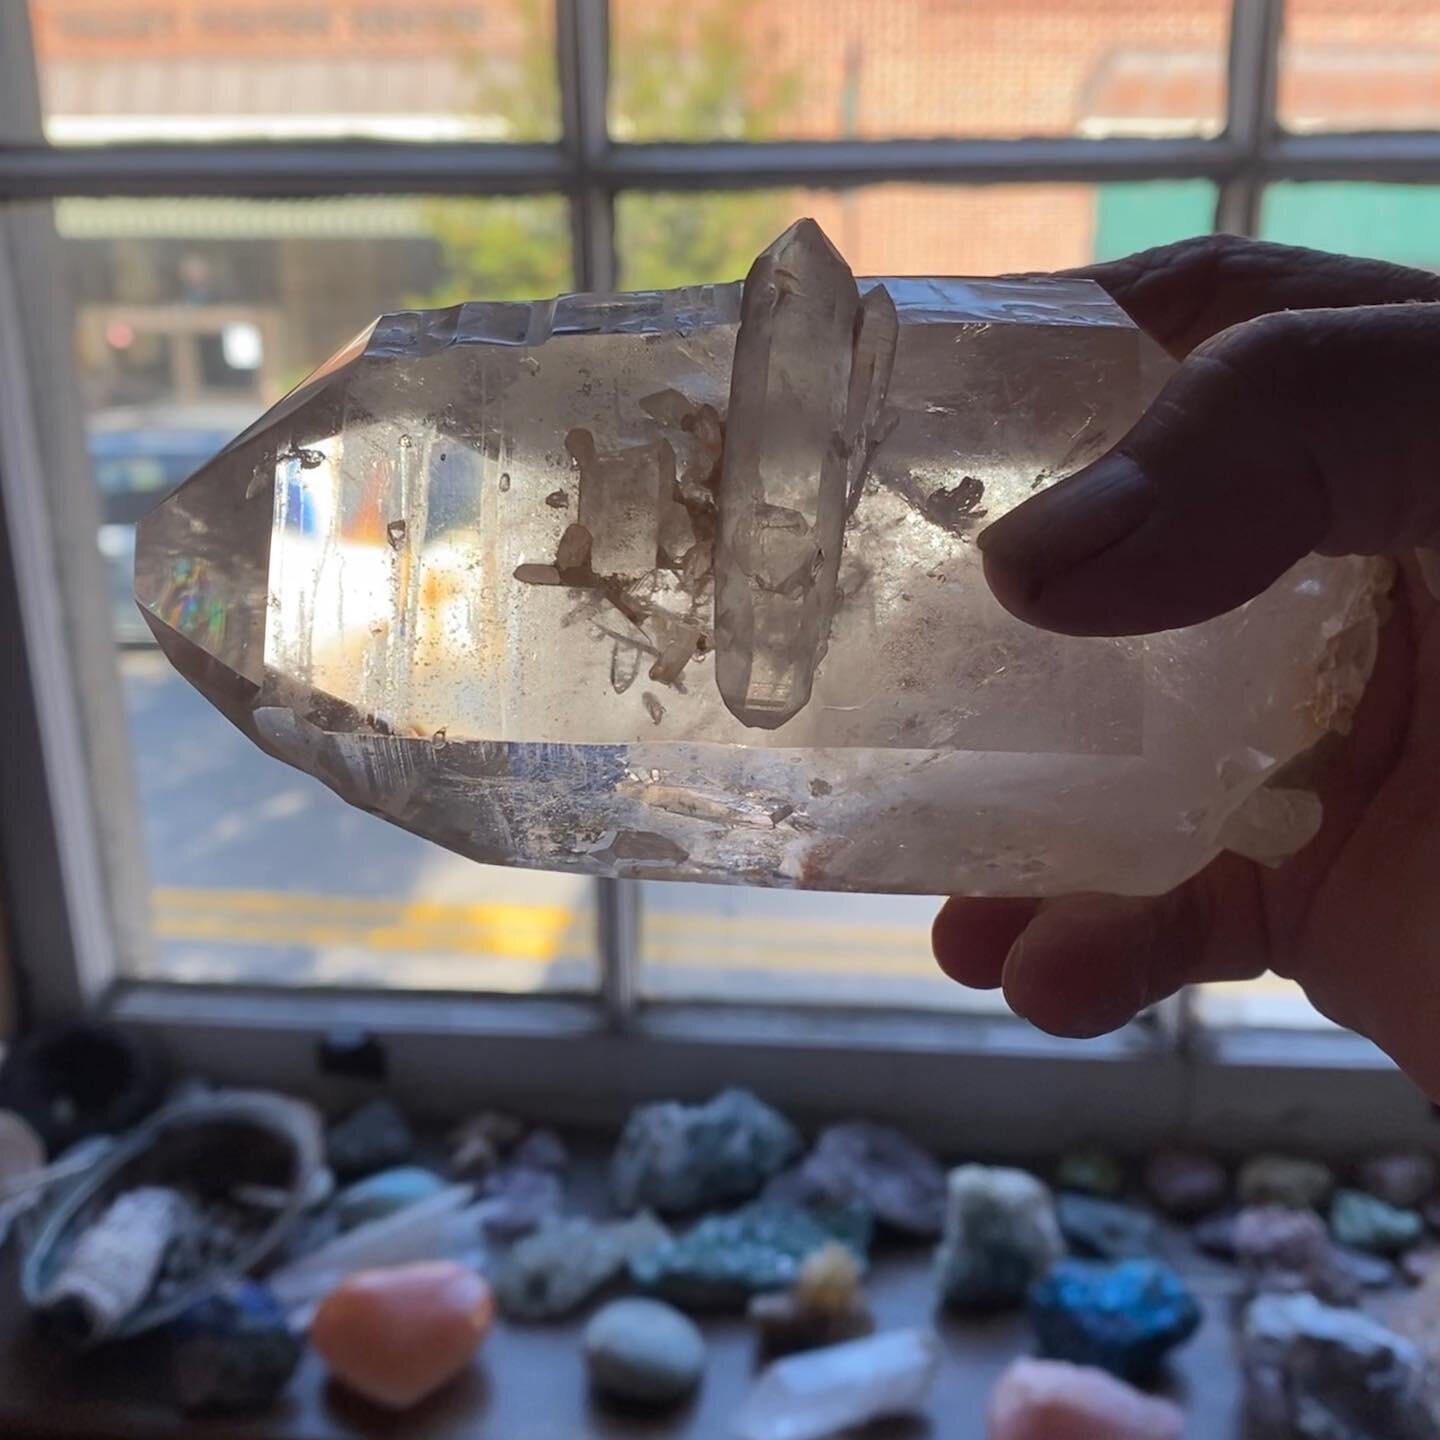 This self healed into a termination lemurian w/ attached tantric twin and other  crystals is a powerhouse. Just learning all about it over the last couple of weeks.🙏🏼🙌💛